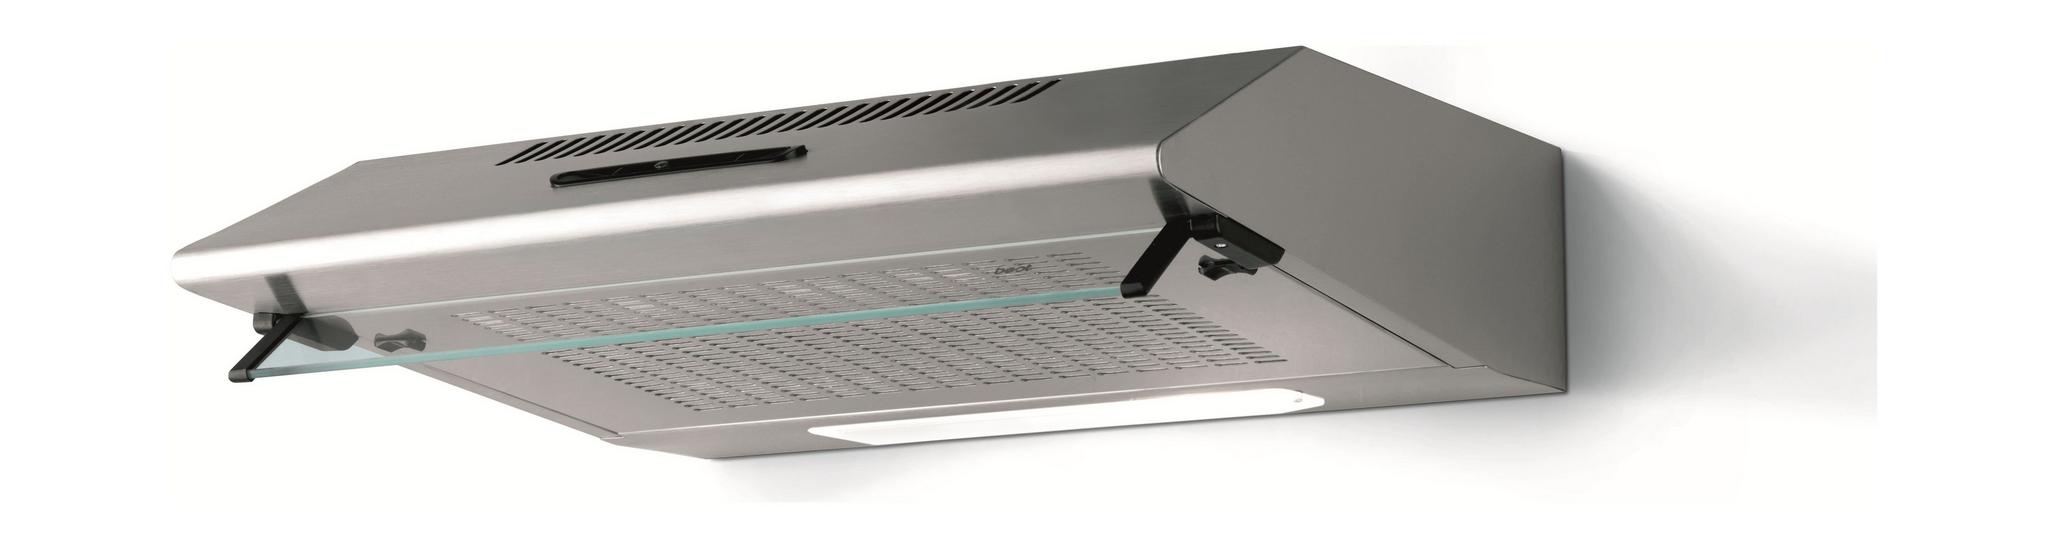 Lagermania 90x60 5-burner Stainless Steel Gas Cooker + Lagermania 90 x 60 Cooker Hood